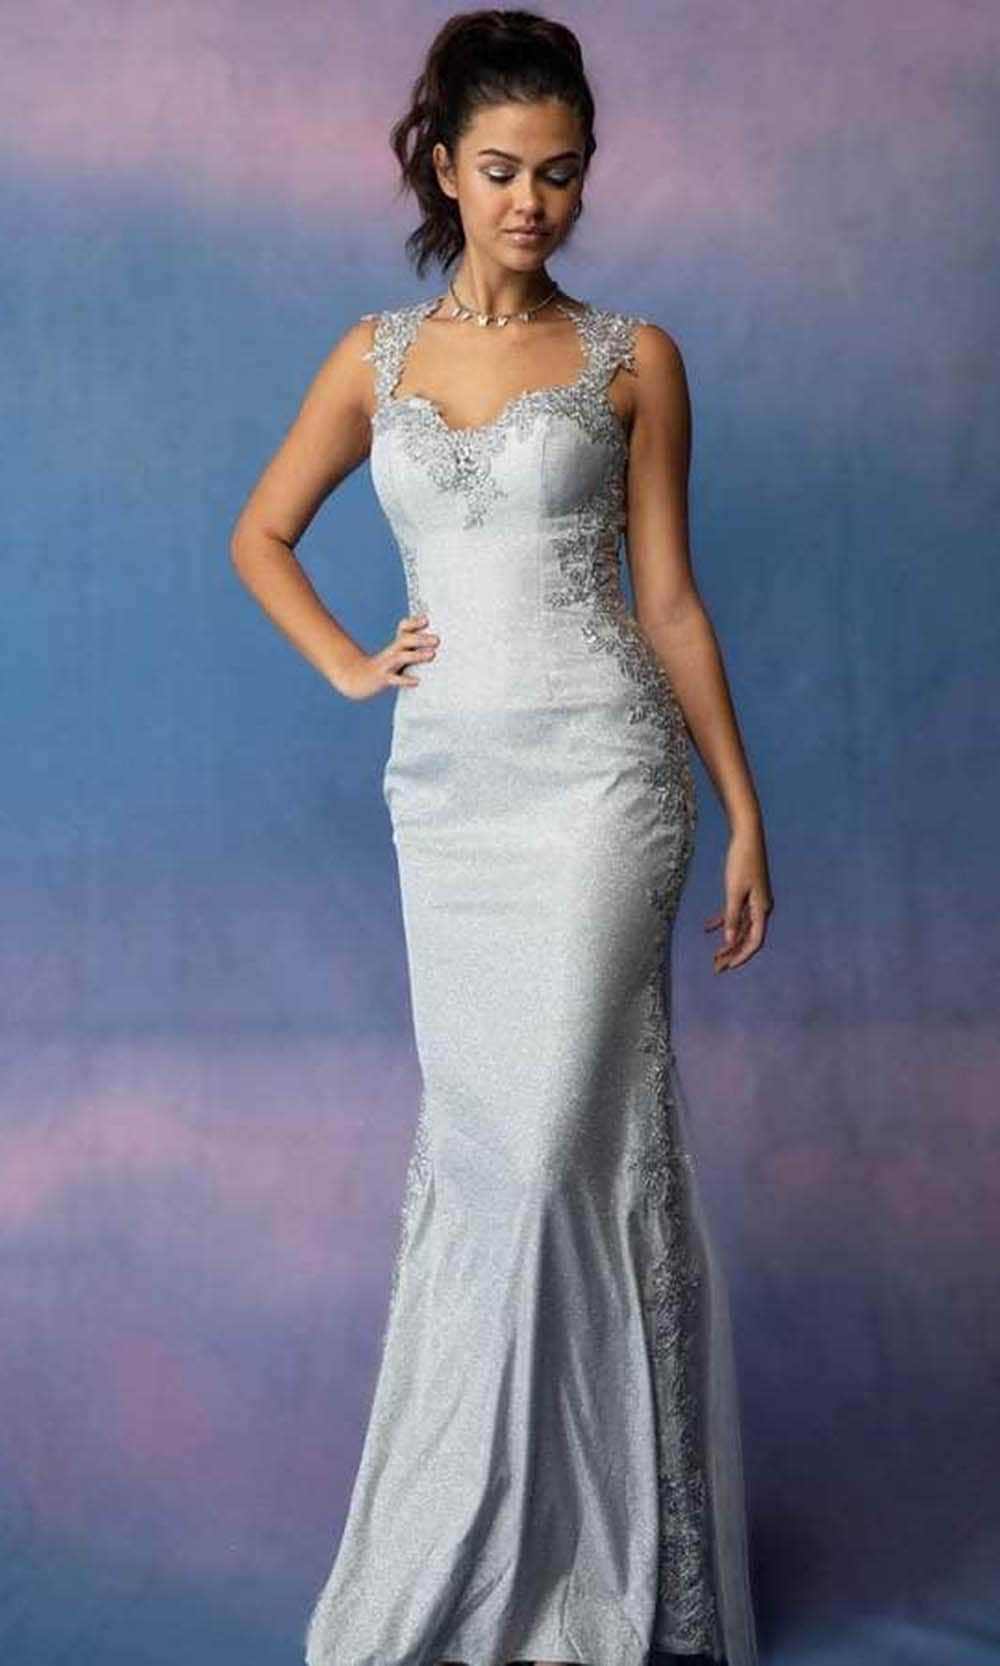 Image of Eureka Fashion 9006 - Embroidered Sweetheart Neck Evening Gown